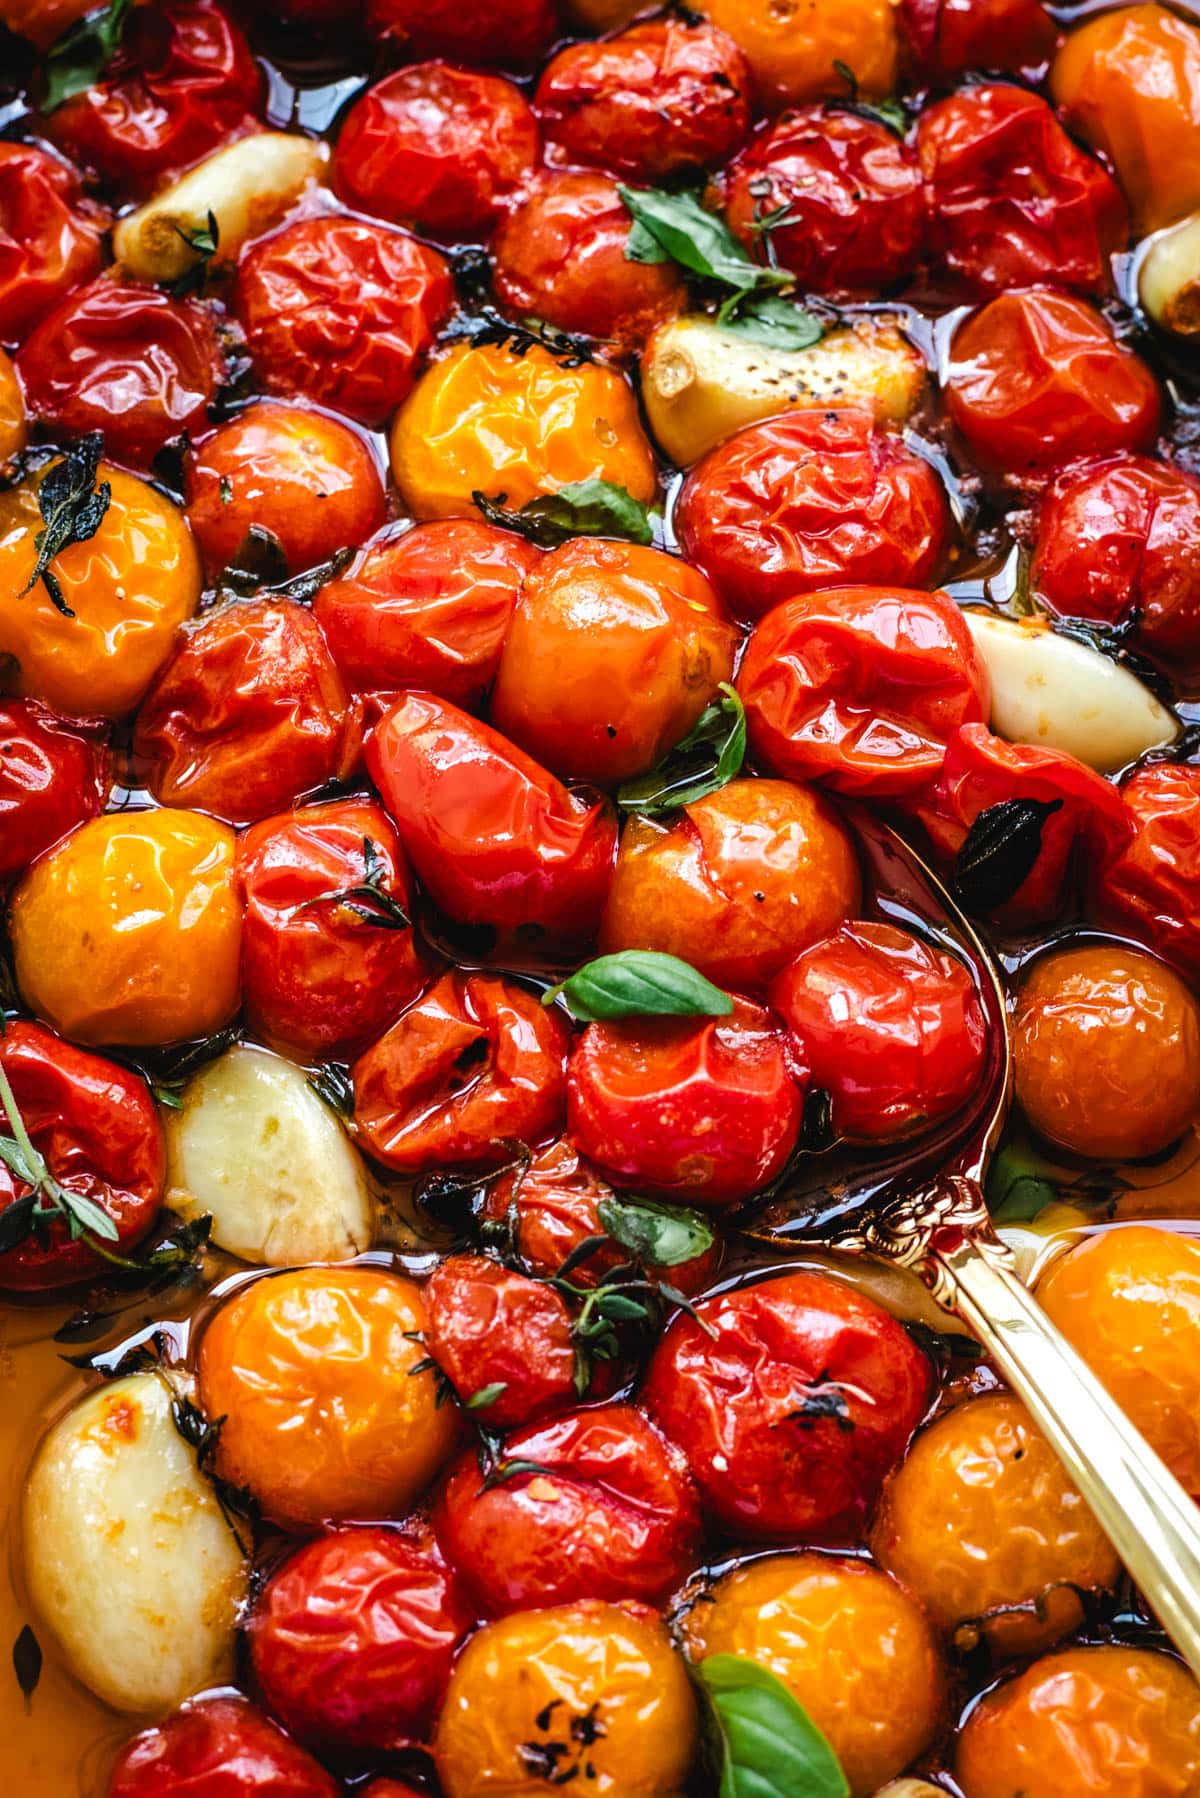 A close-up of roasted cherry tomatoes, garlic cloves, and herbs in olive oil and tomato juices.